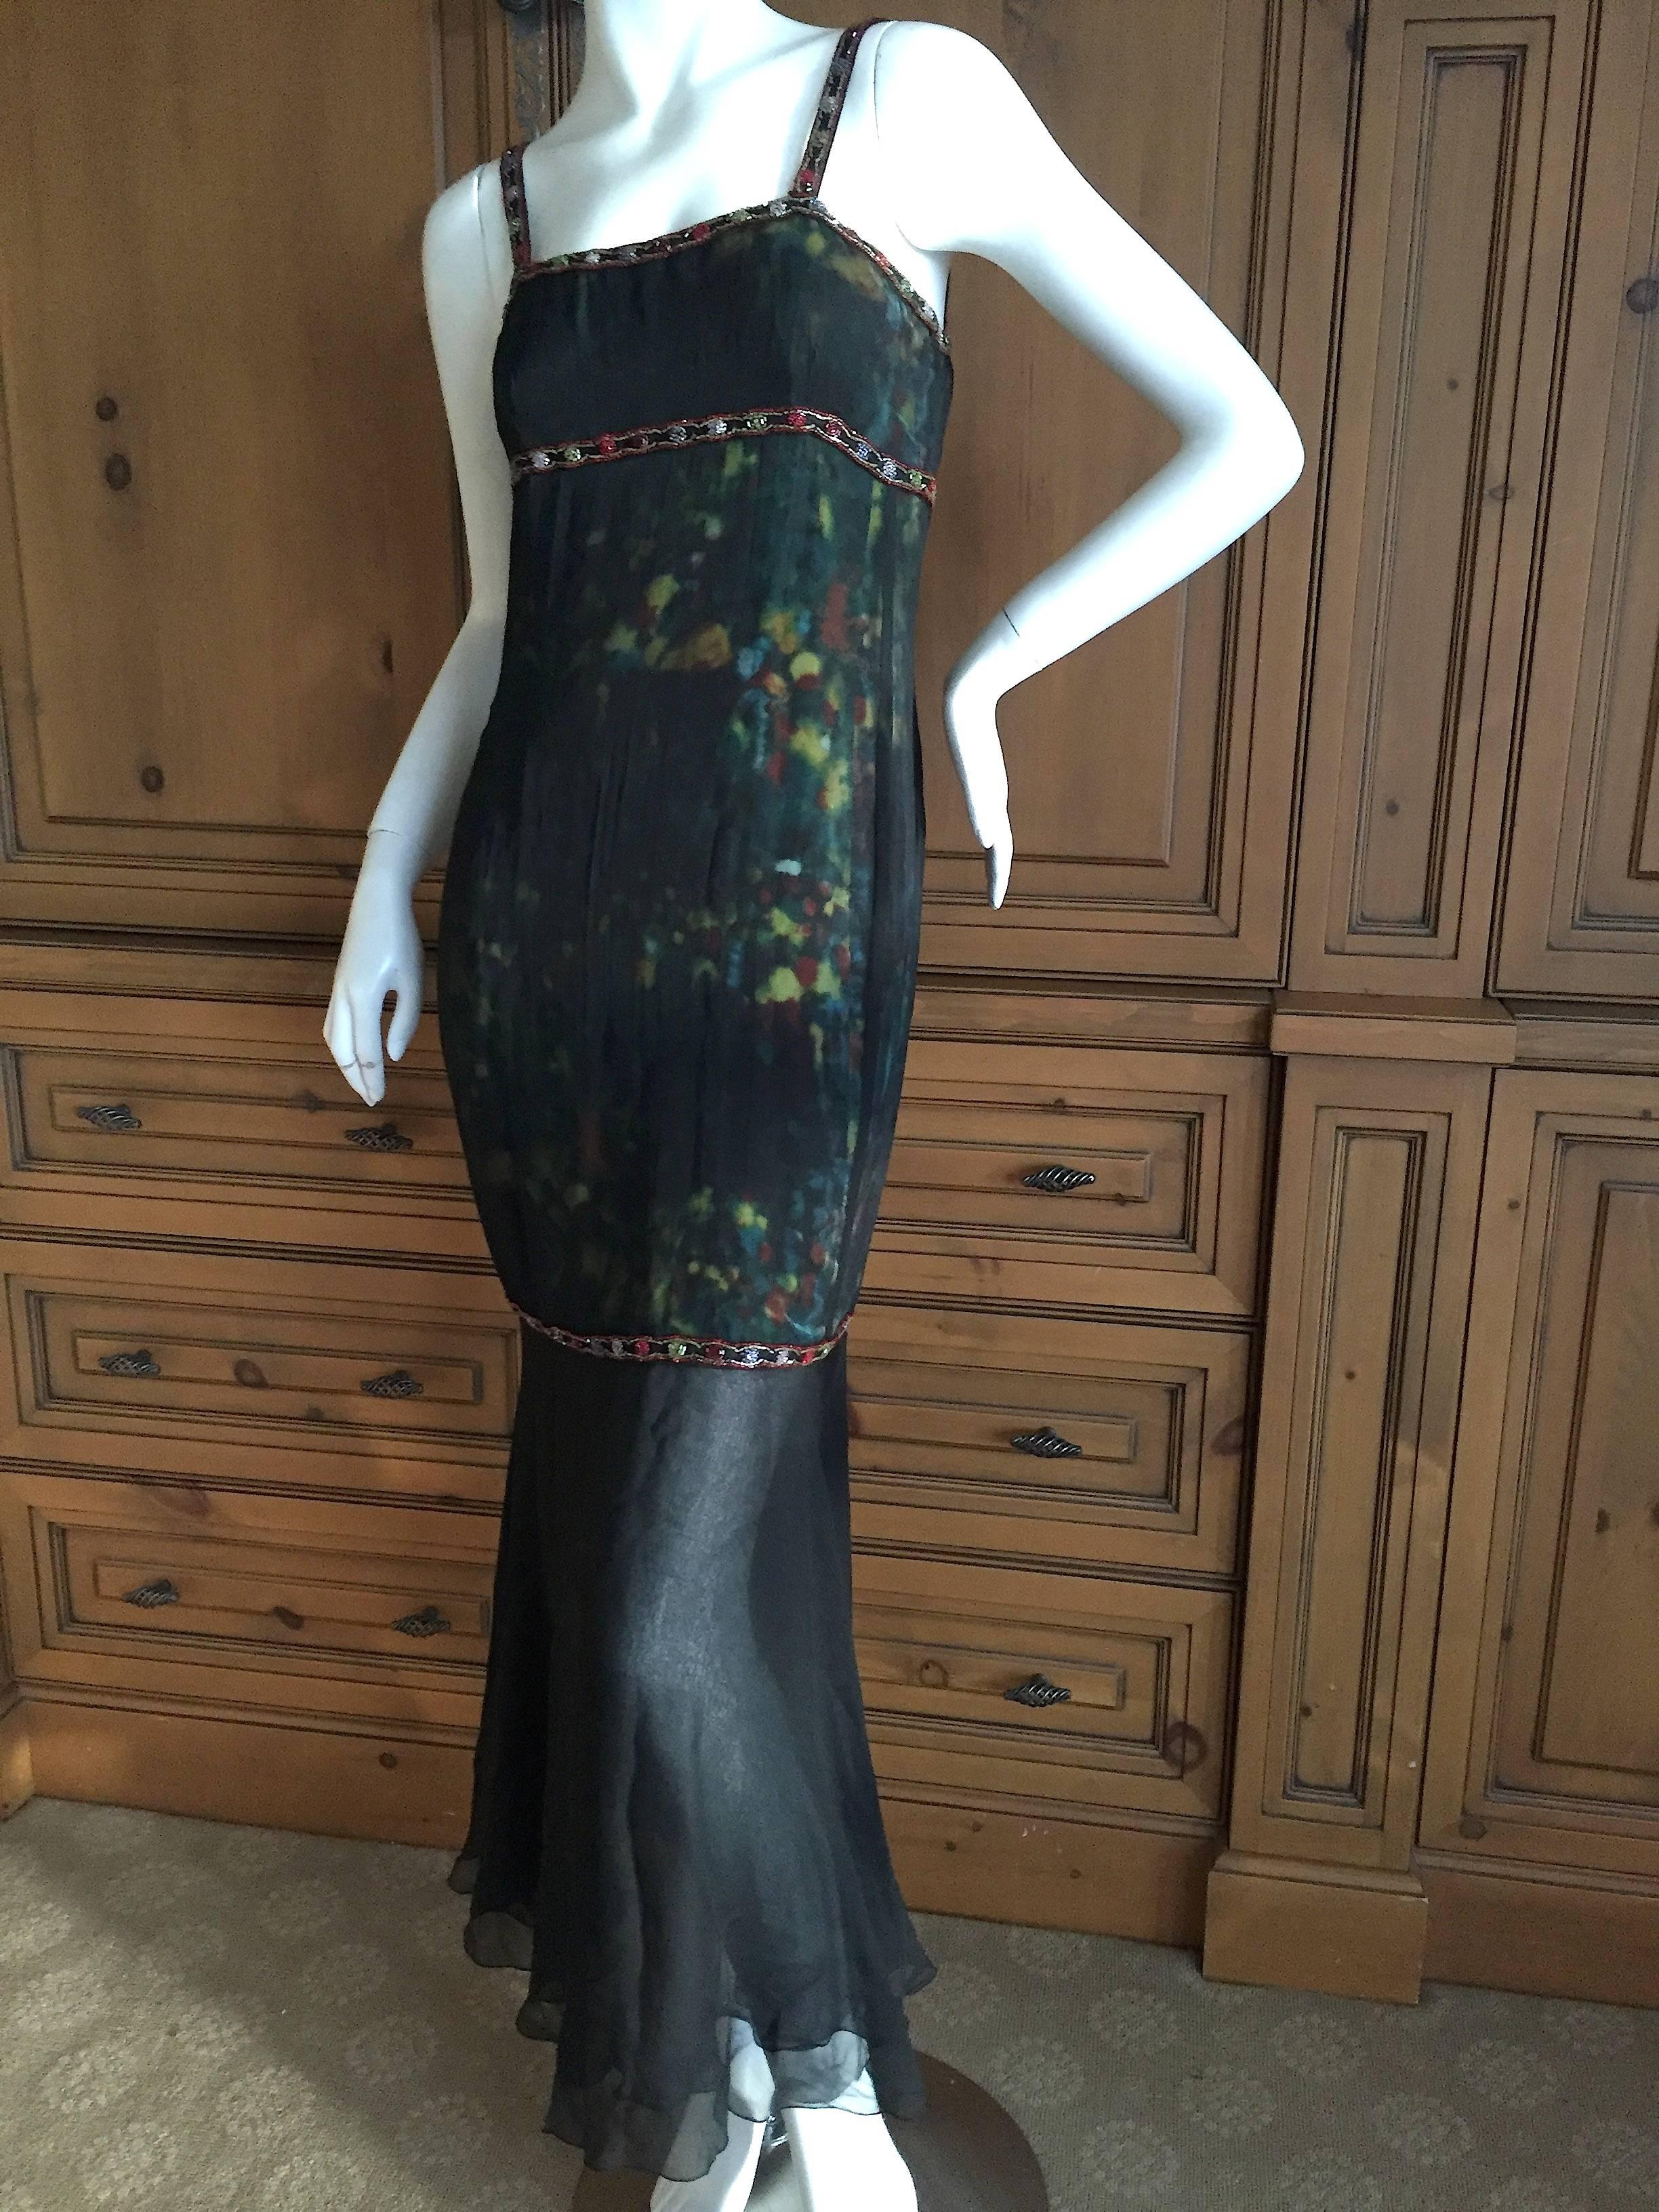 Chanel SIlk Overlay Dress with Beaded Embellishment A '97 2